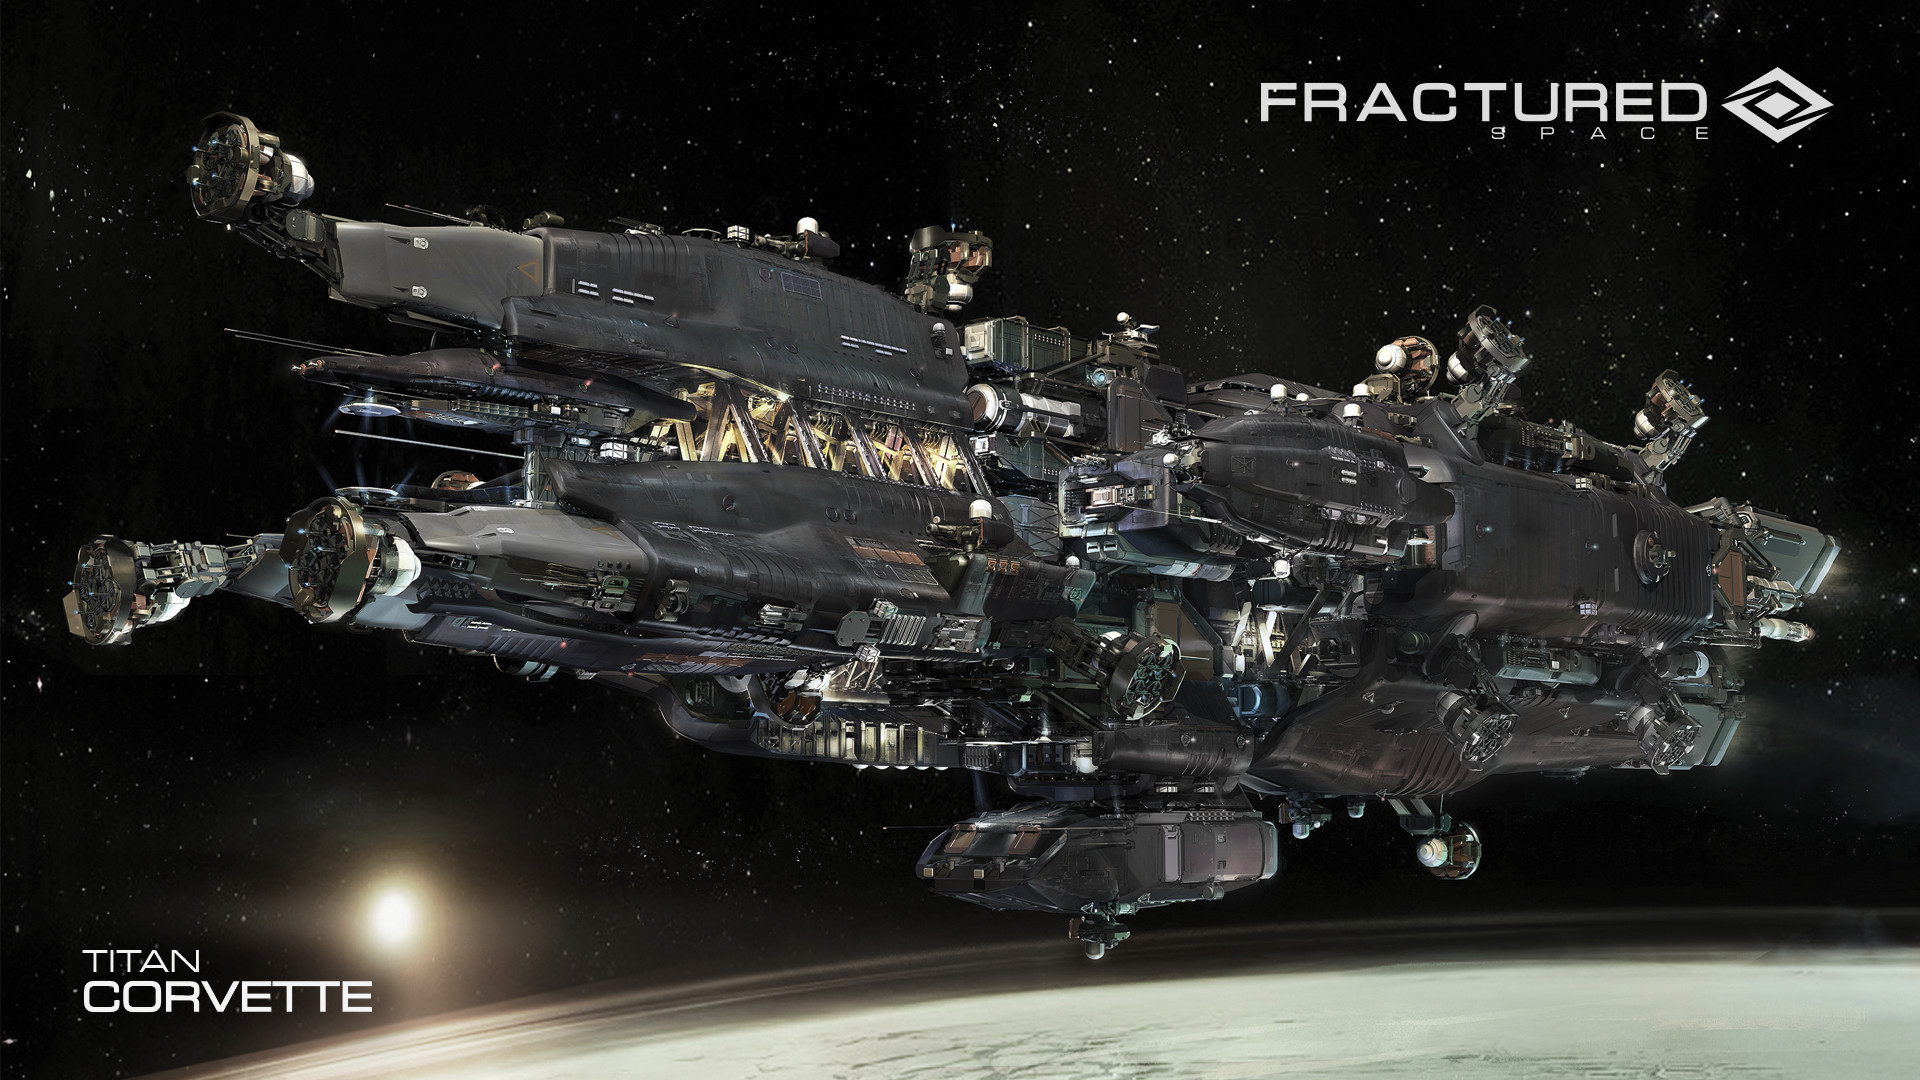 1920x1080 Steam Community :: Guide :: All Fractured Space Wallpapers, Available In HD